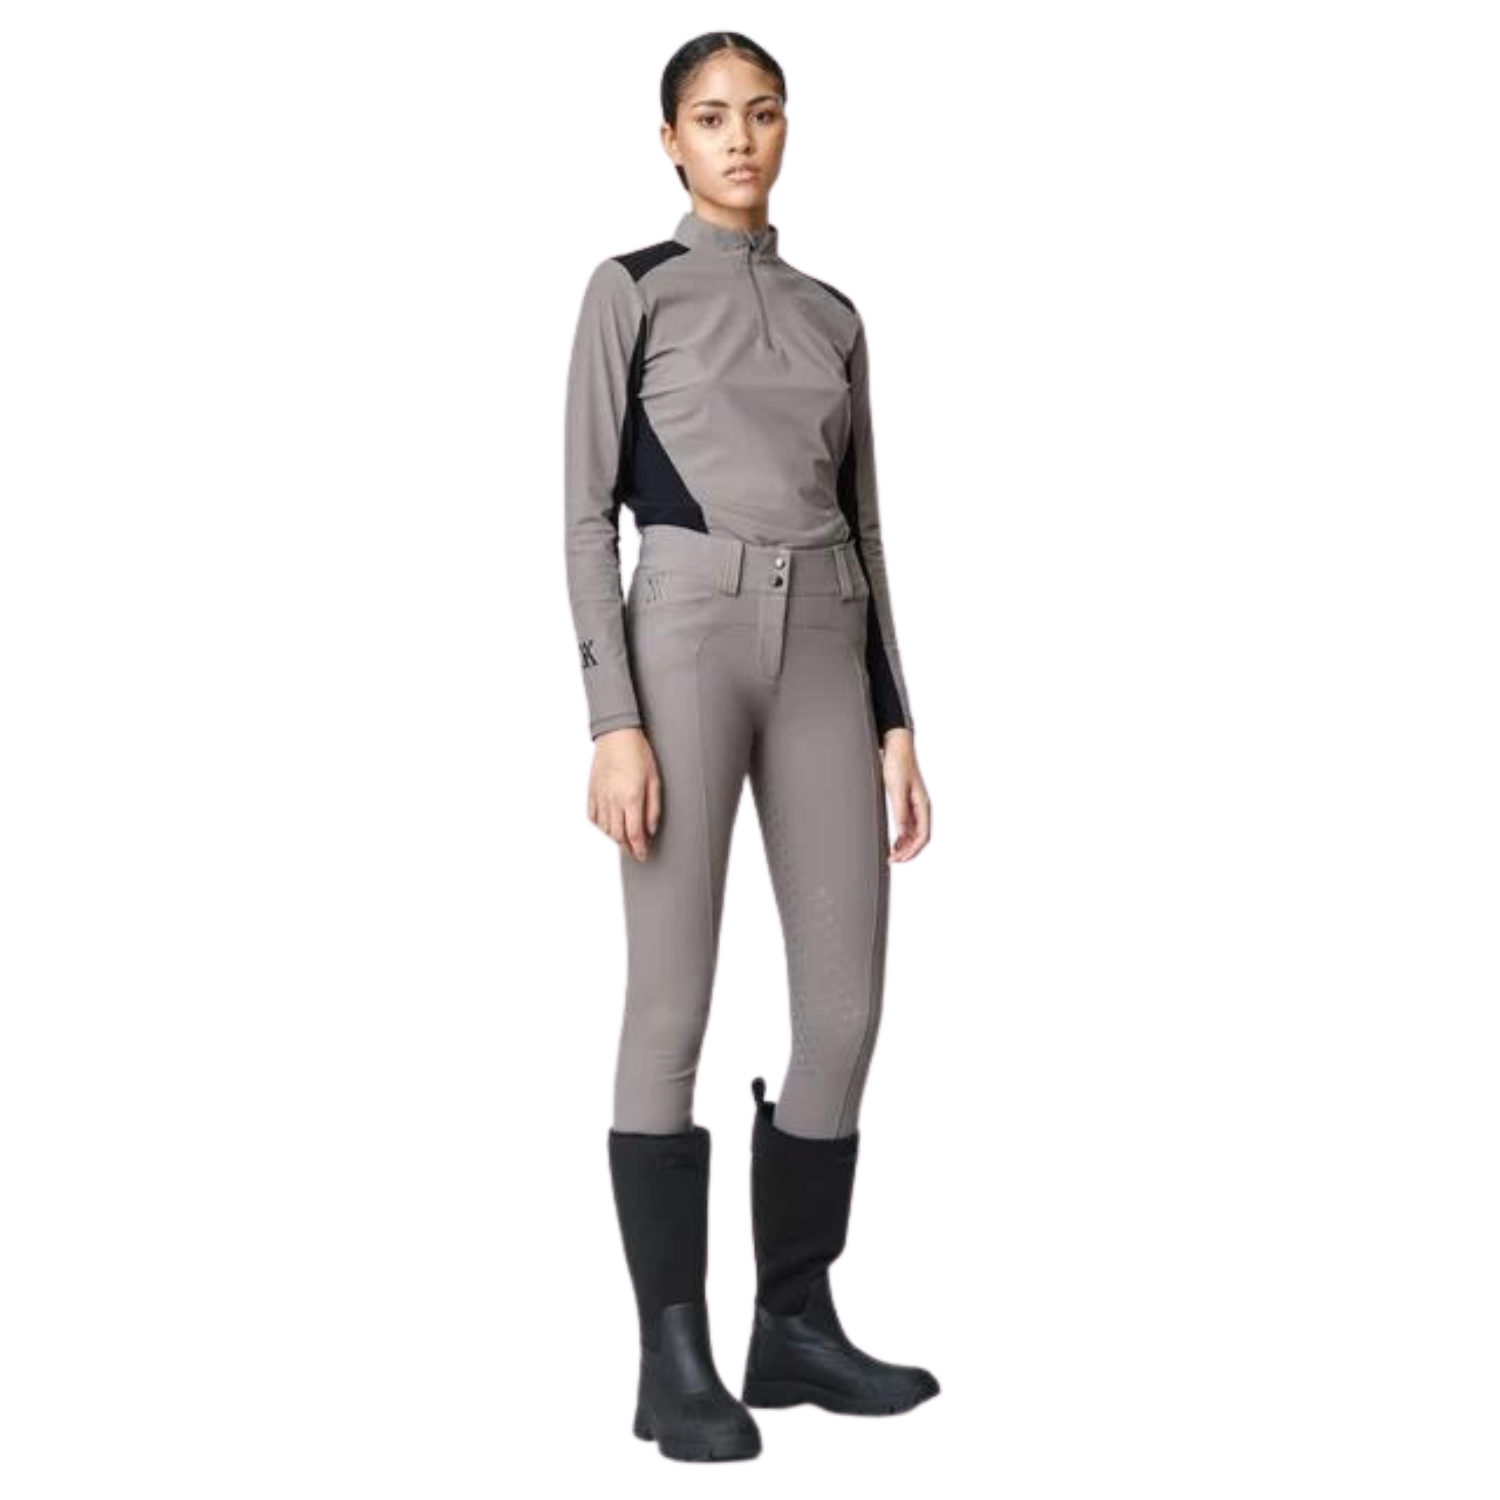 Ladies Compression High Rise Performance Knee Grip Breeches - Taupe (LAST ONE - X-Small - IT38 - UK6)